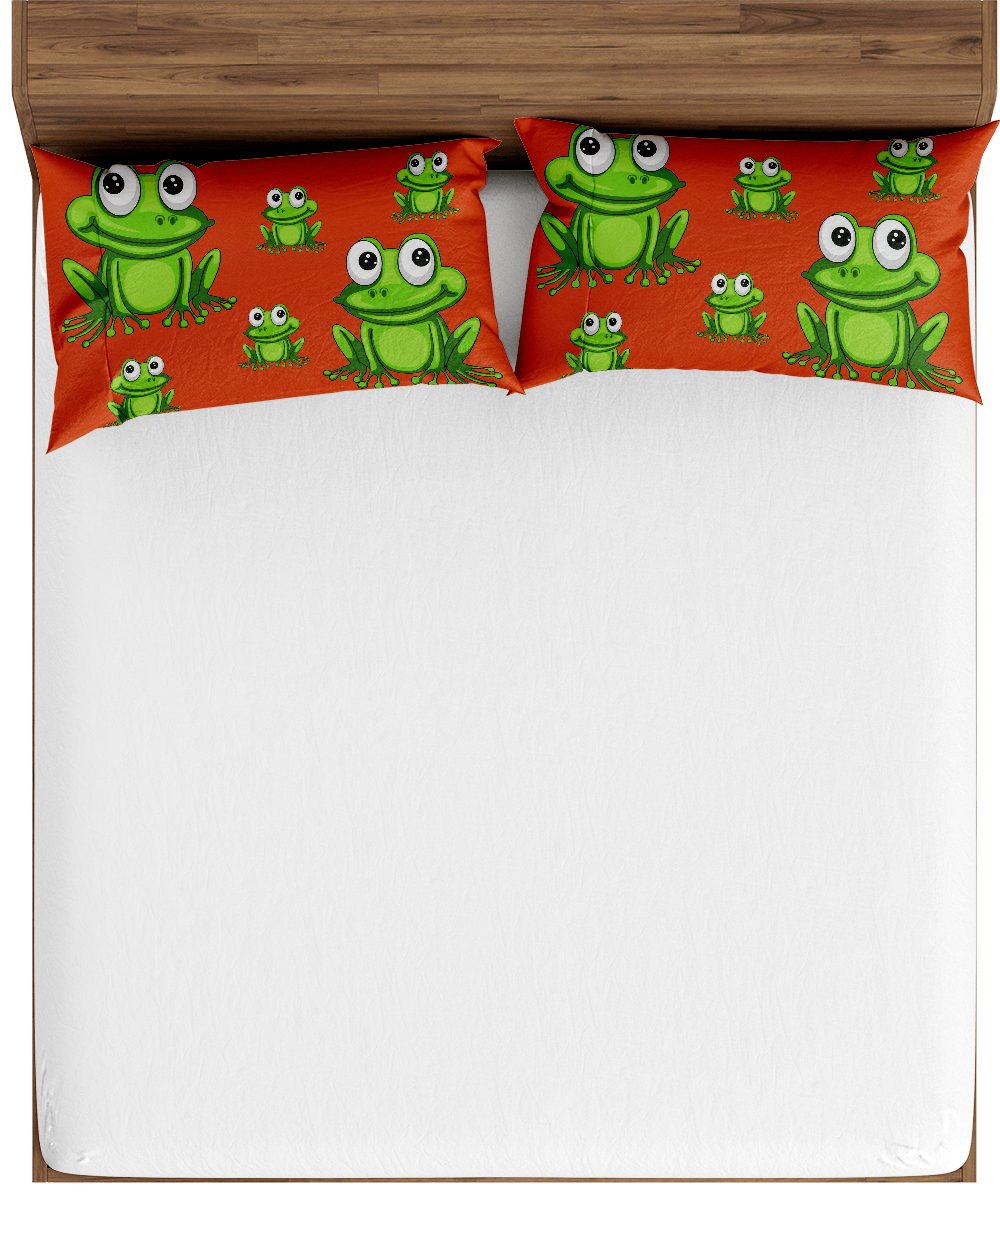 Freaky Frog Bed Pillows - fungear.com.au